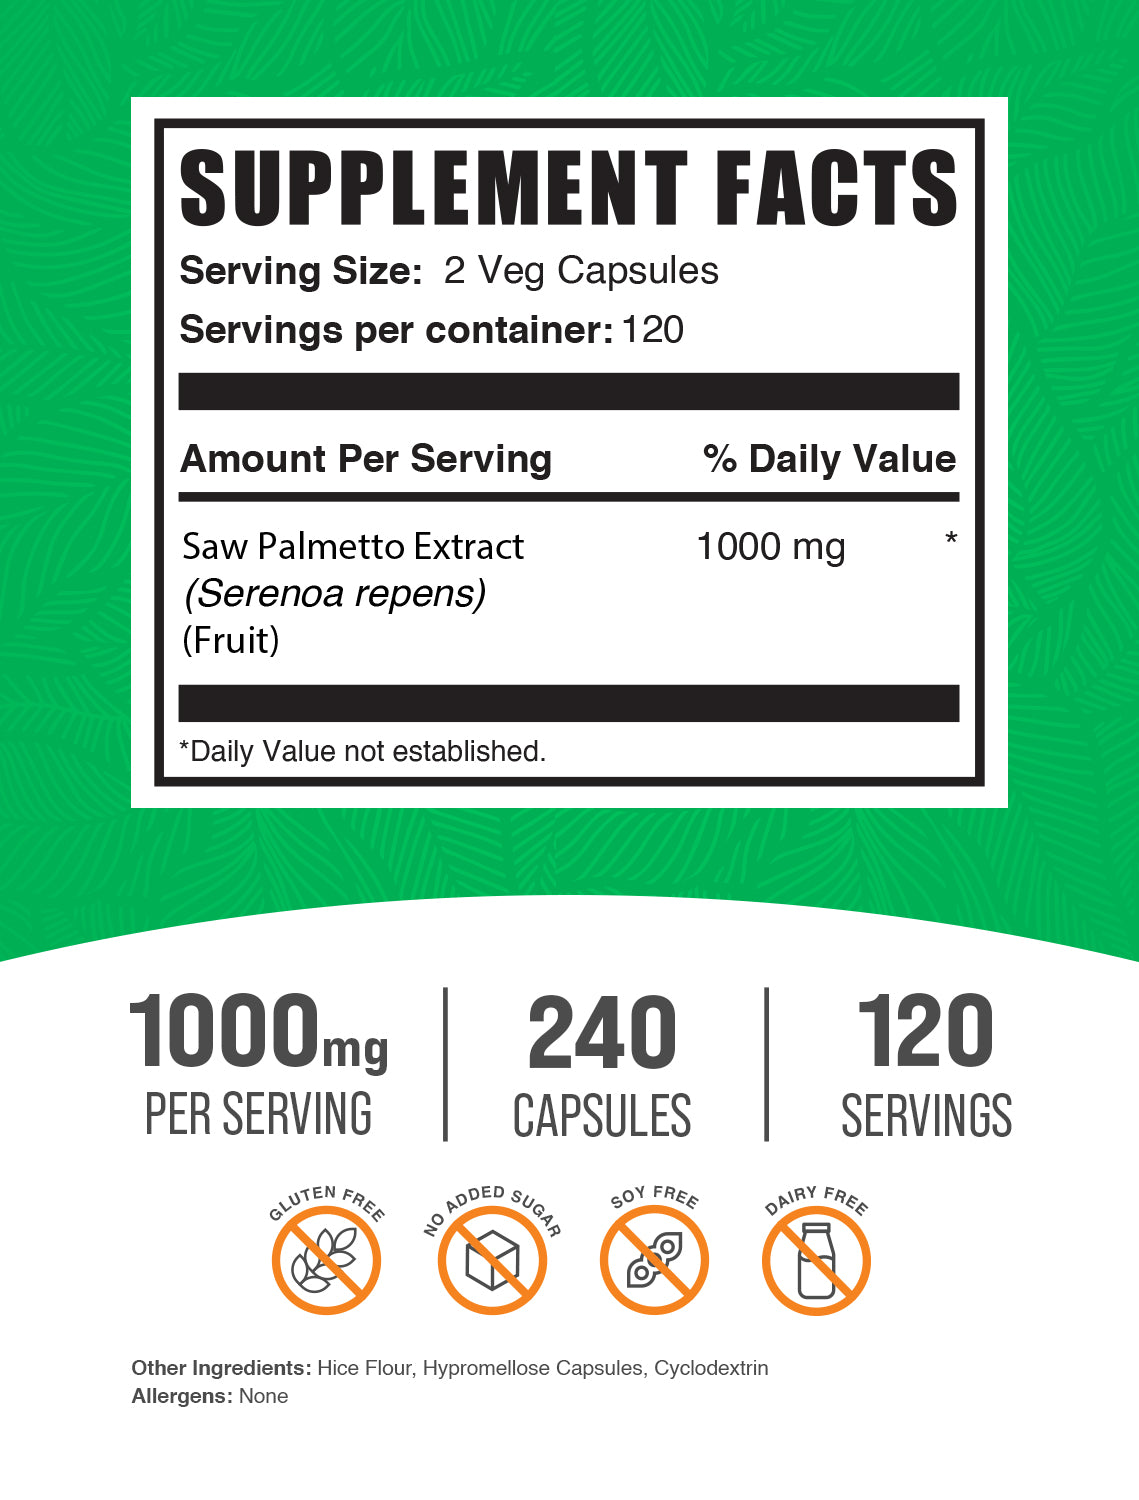 Saw Palmetto Extract 240 ct Capsules label